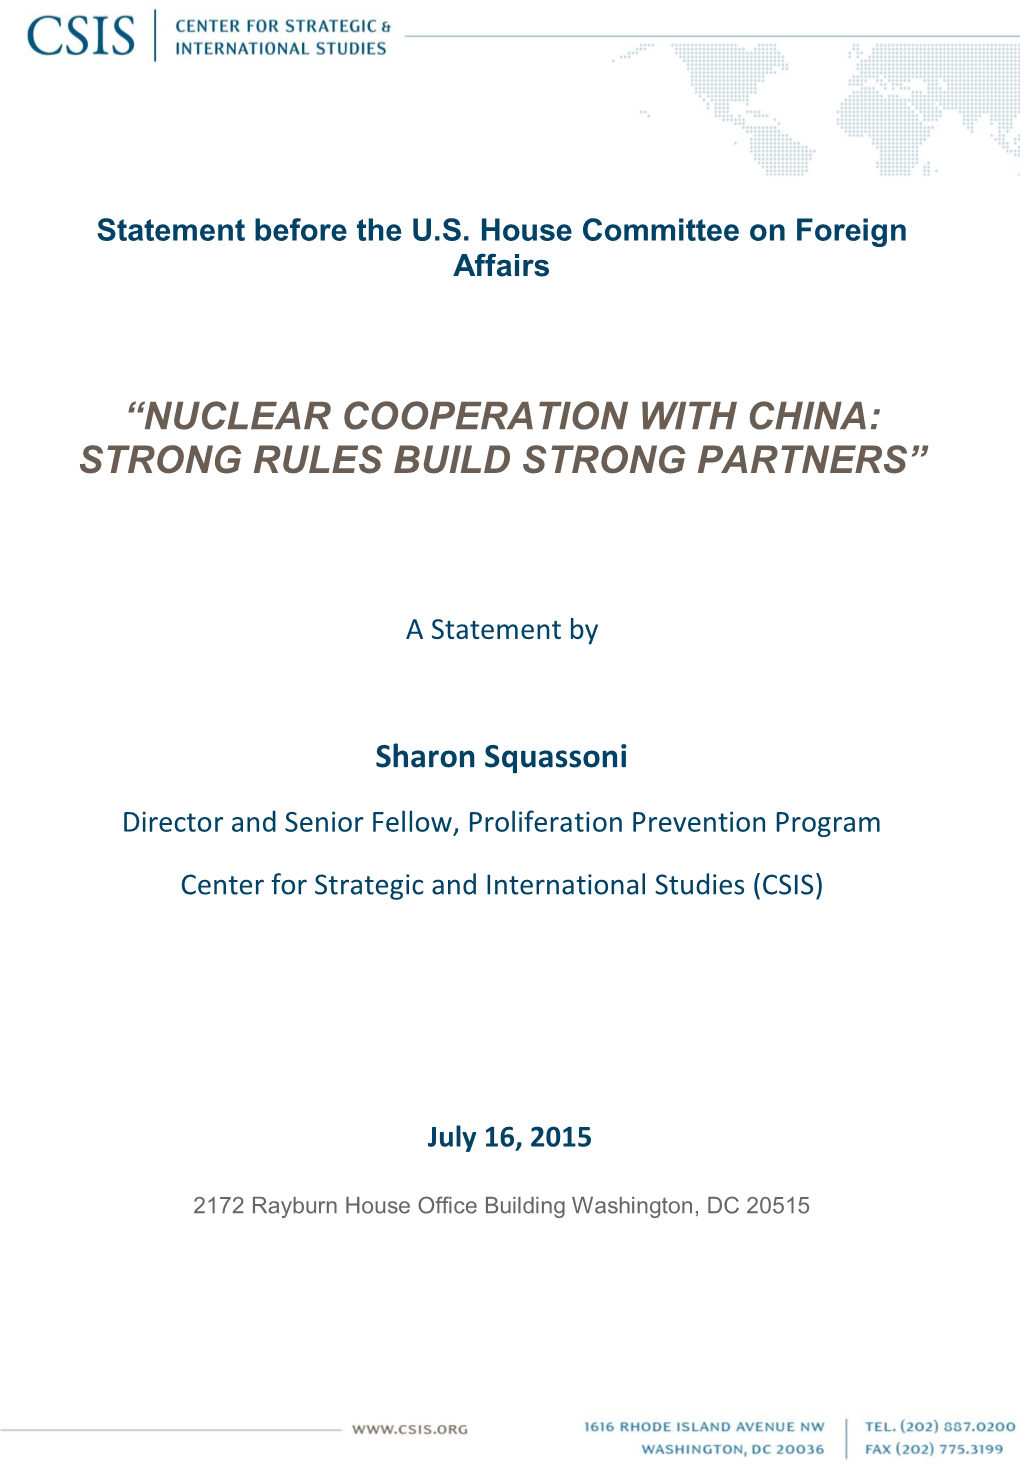 “Nuclear Cooperation with China: Strong Rules Build Strong Partners”